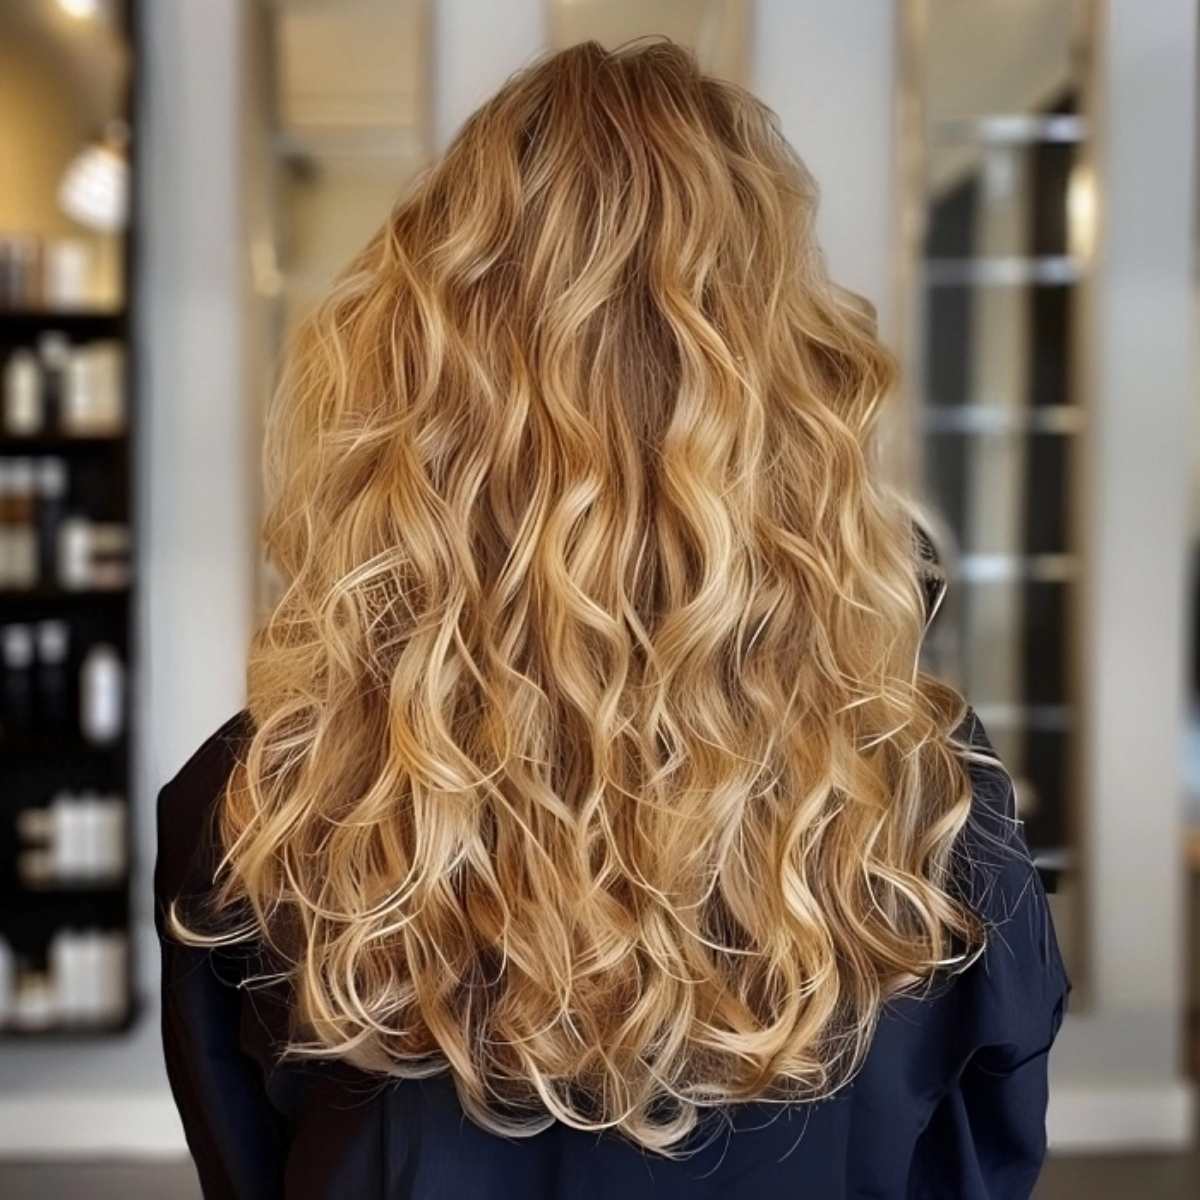 blunt cut long hair with layered curls